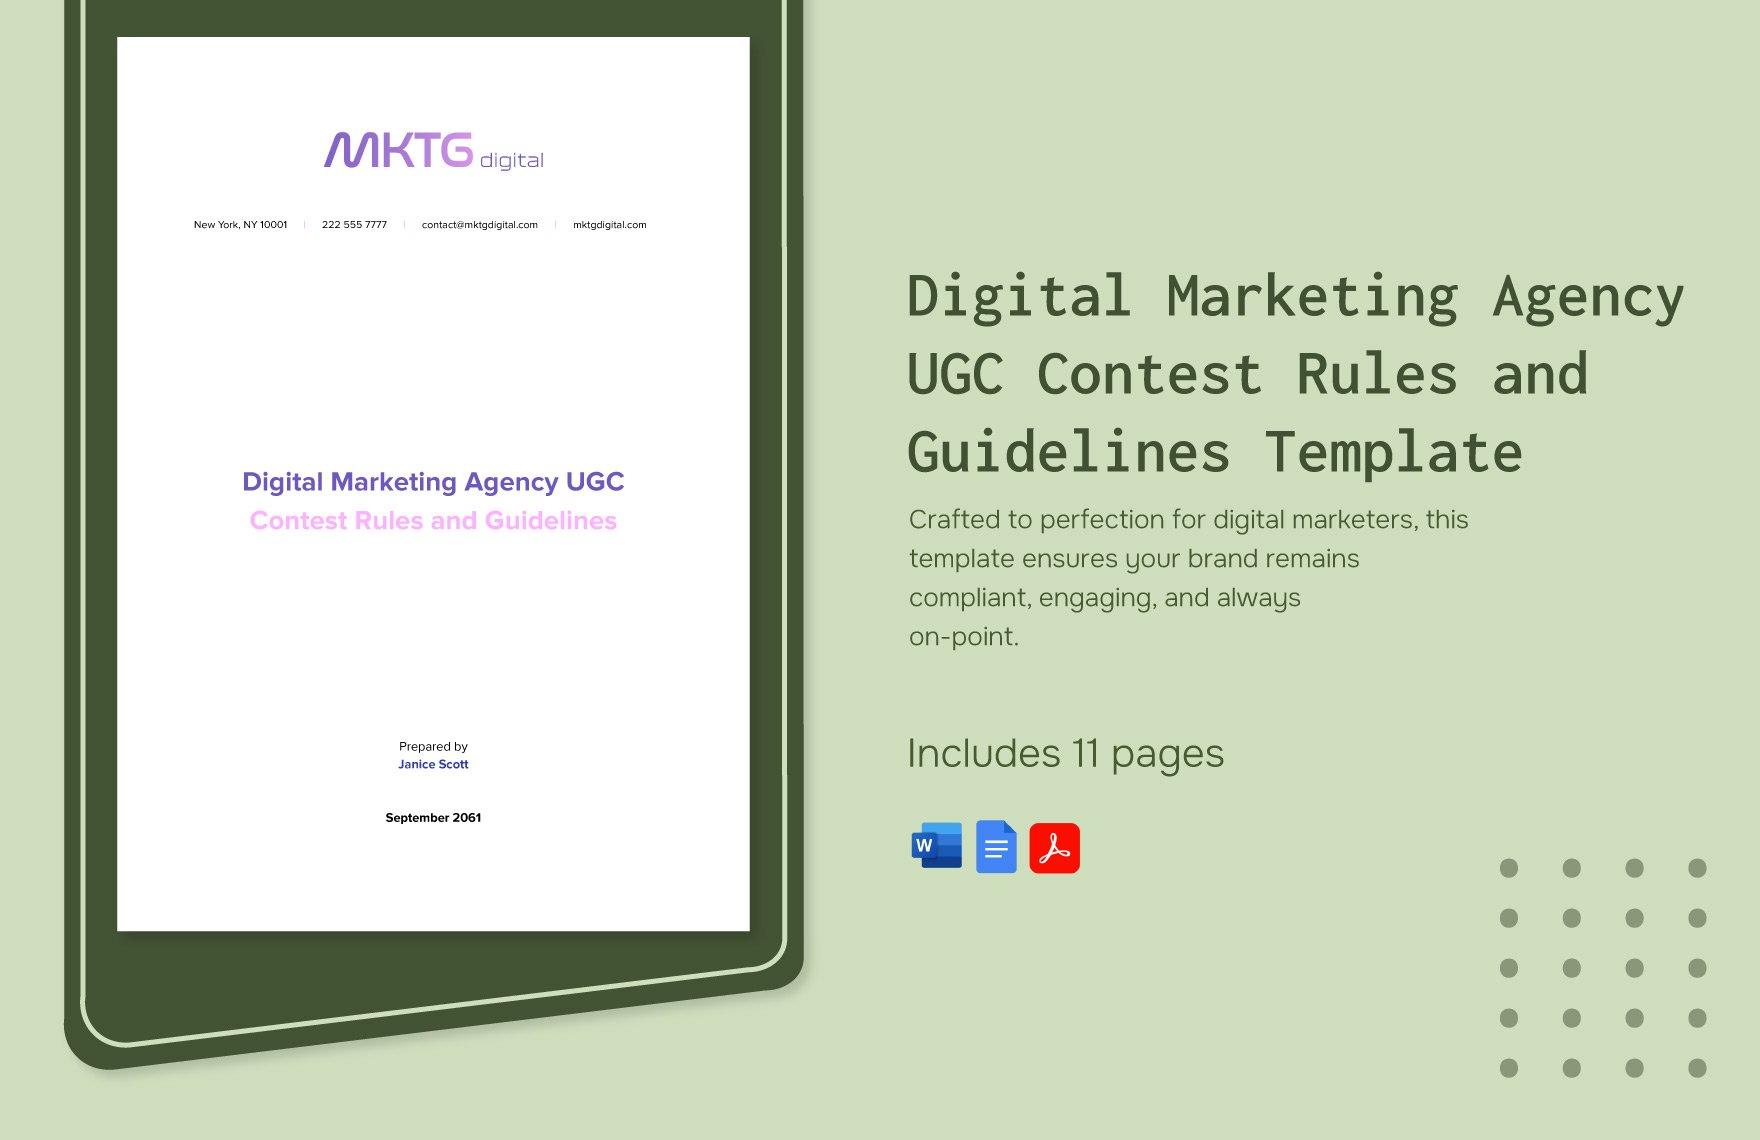 Digital Marketing Agency UGC Contest Rules and Guidelines Template